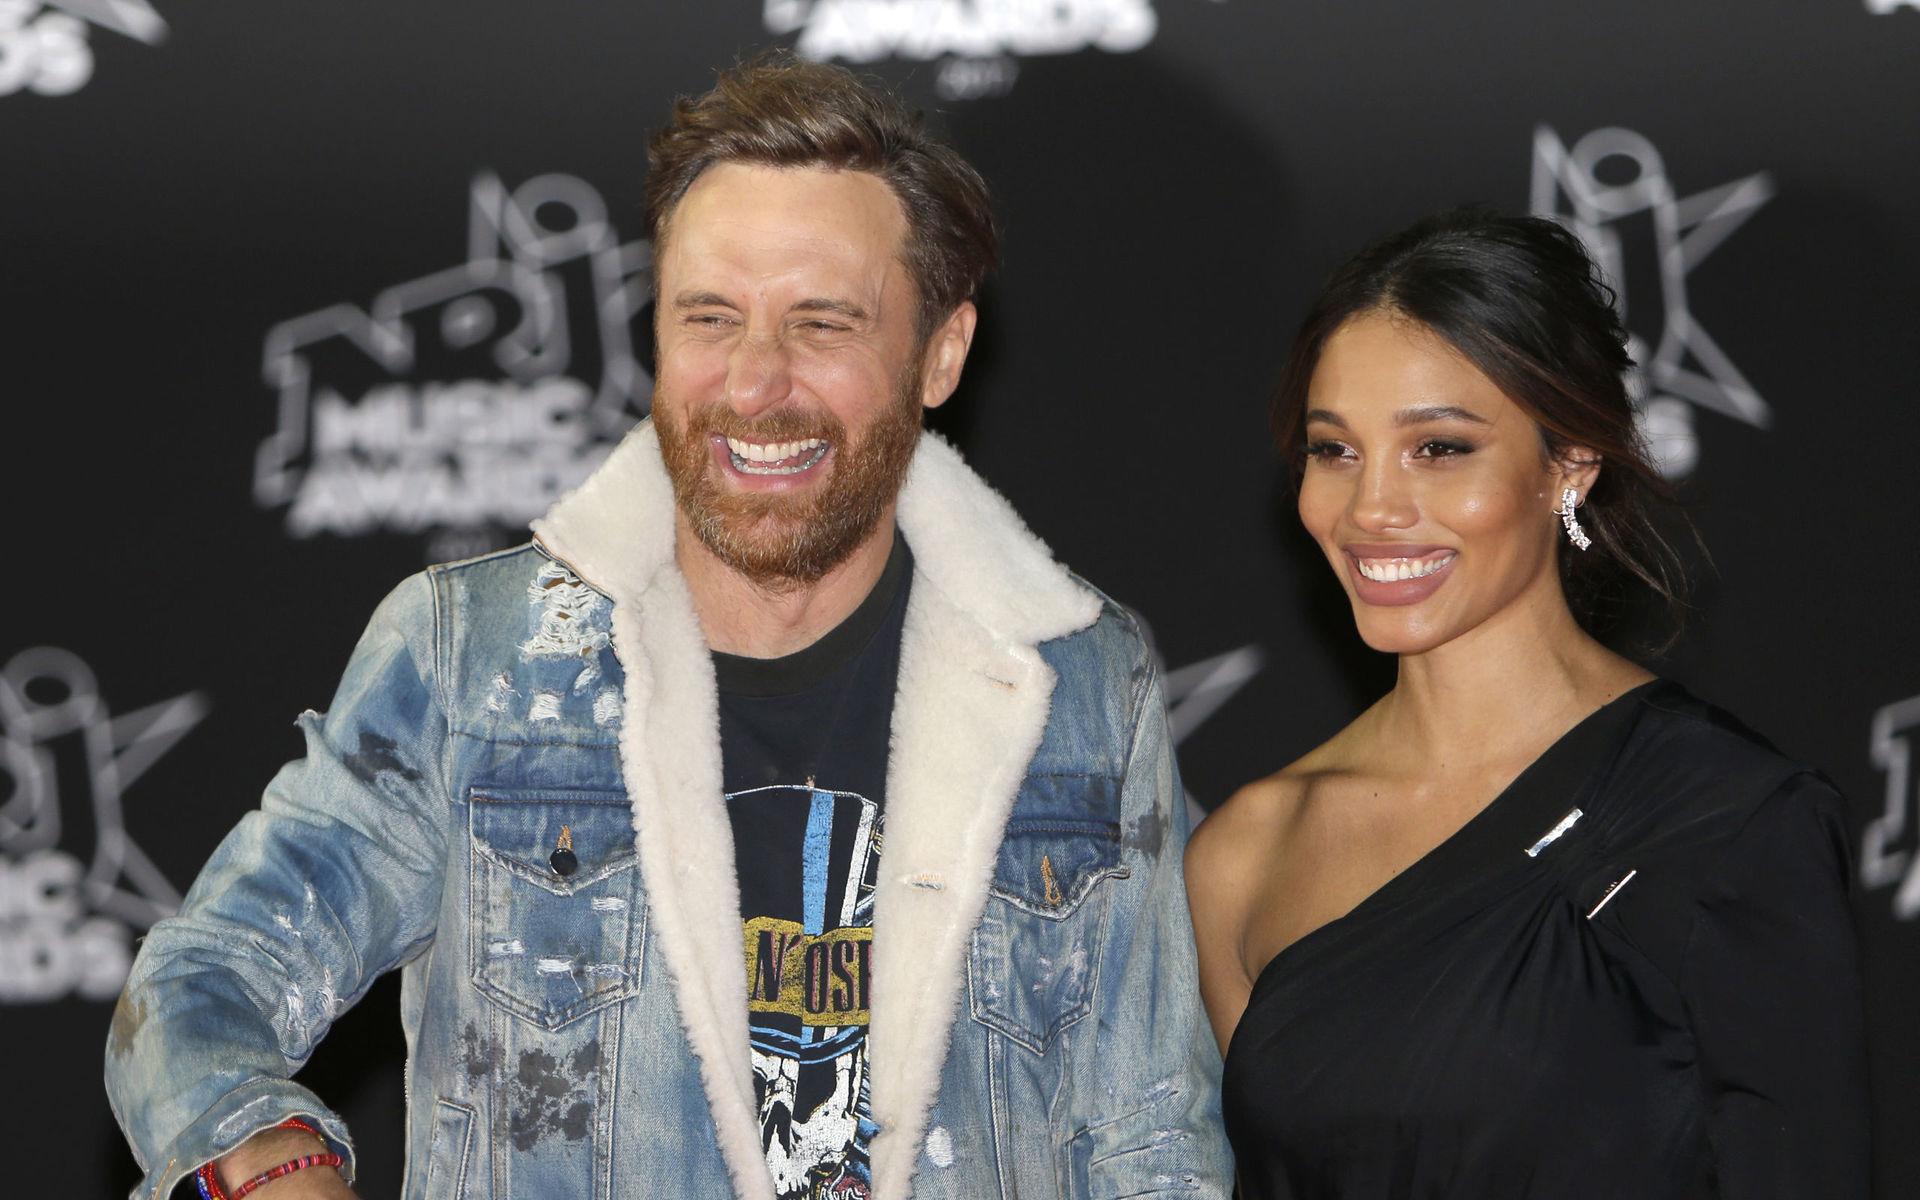 French DJ and producer of electro music, David Guetta, left, arrives with his partner Jessica Ledon at the Cannes festival palace, to take part in the NRJ Music awards ceremony, Saturday, Nov. 4, 2017, in Cannes, southeastern France. (AP Photo/Claude Paris)